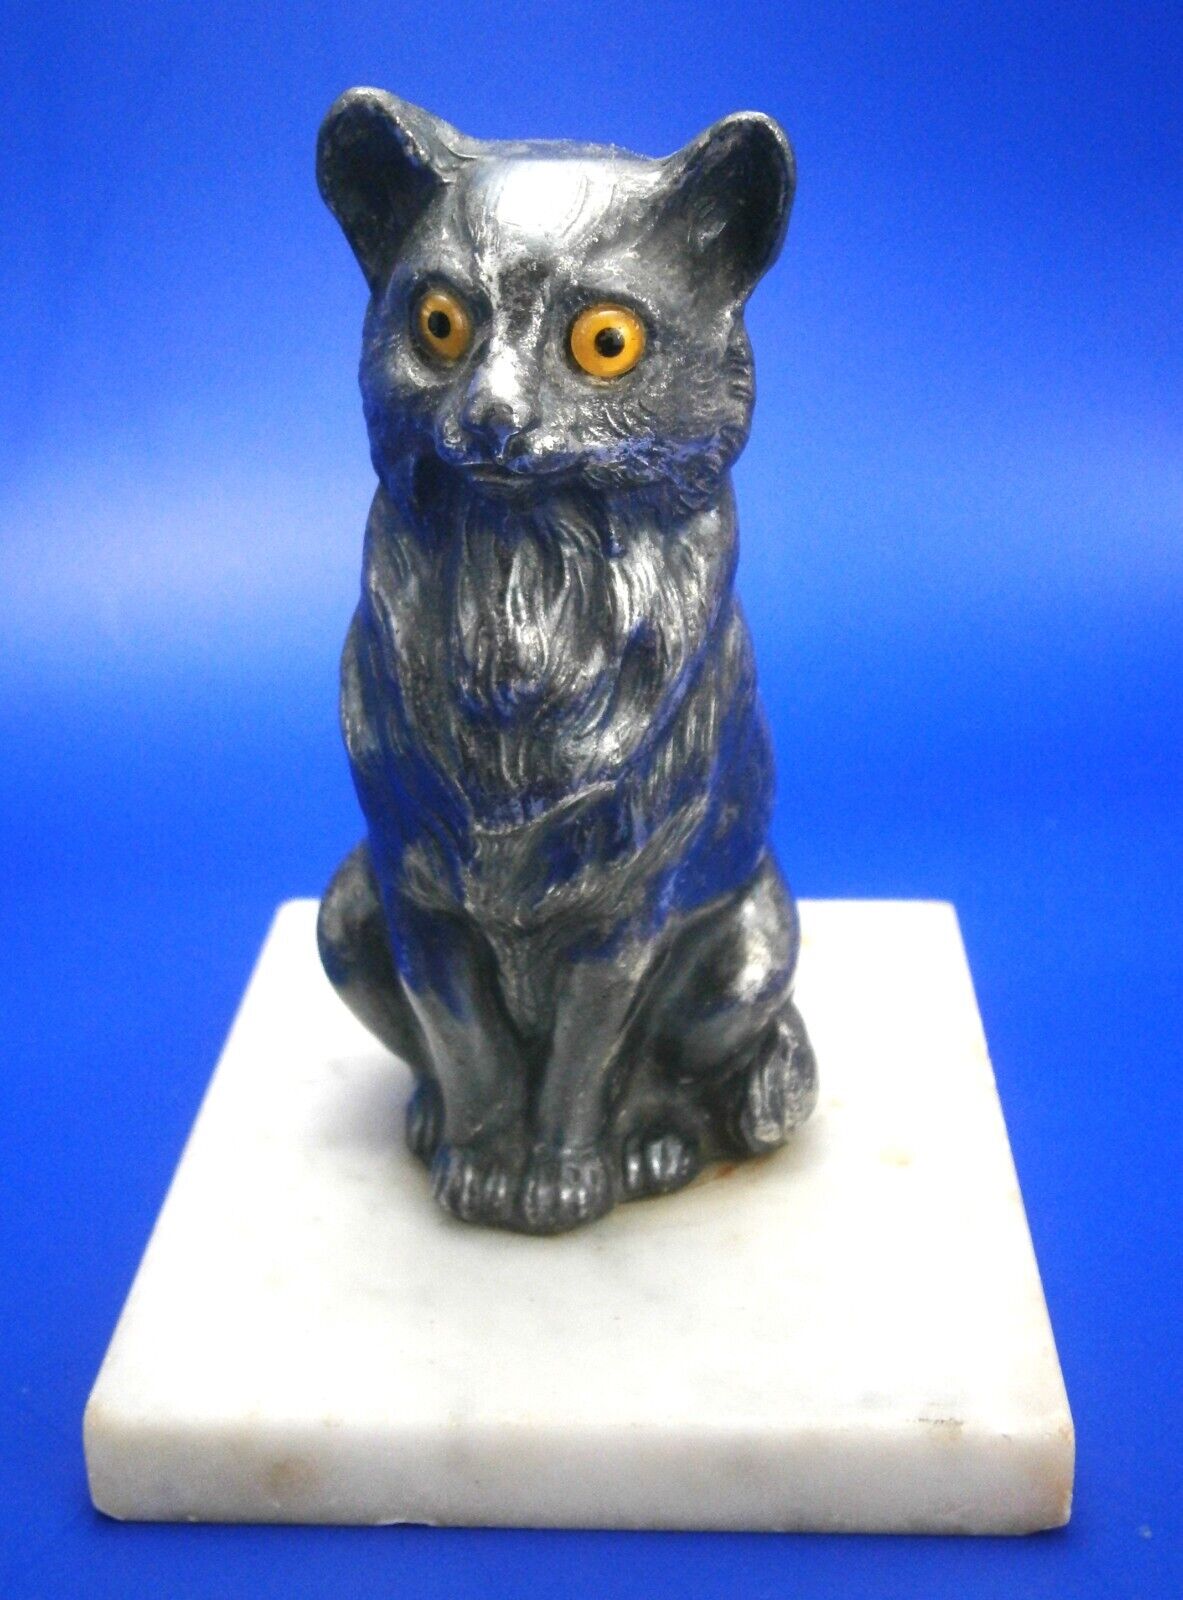 Antique Silverplate Sitting Cat on marble Base from the early 1900's